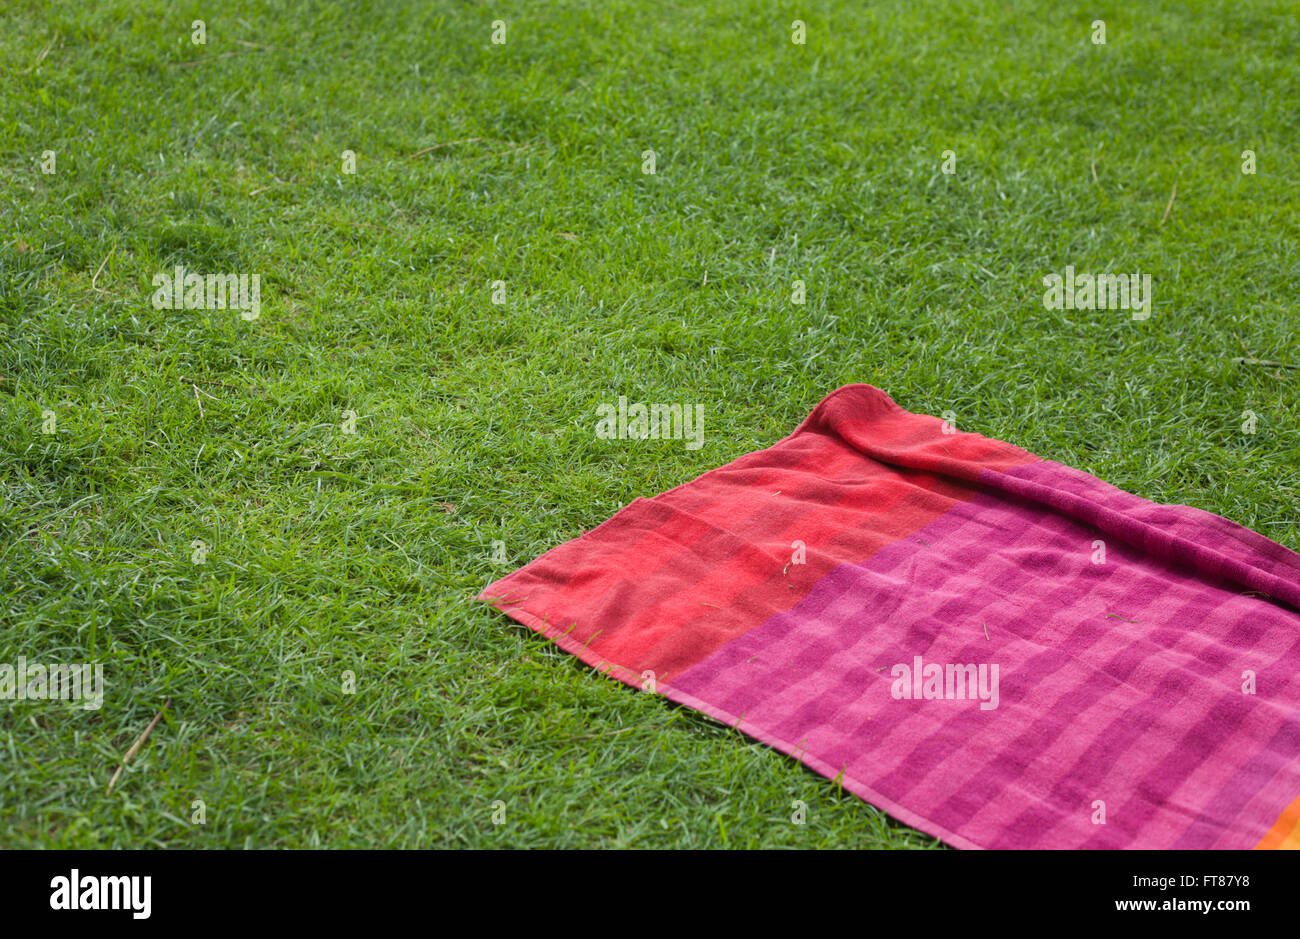 Red towell over the green grass background of a swiming pool Stock Photo